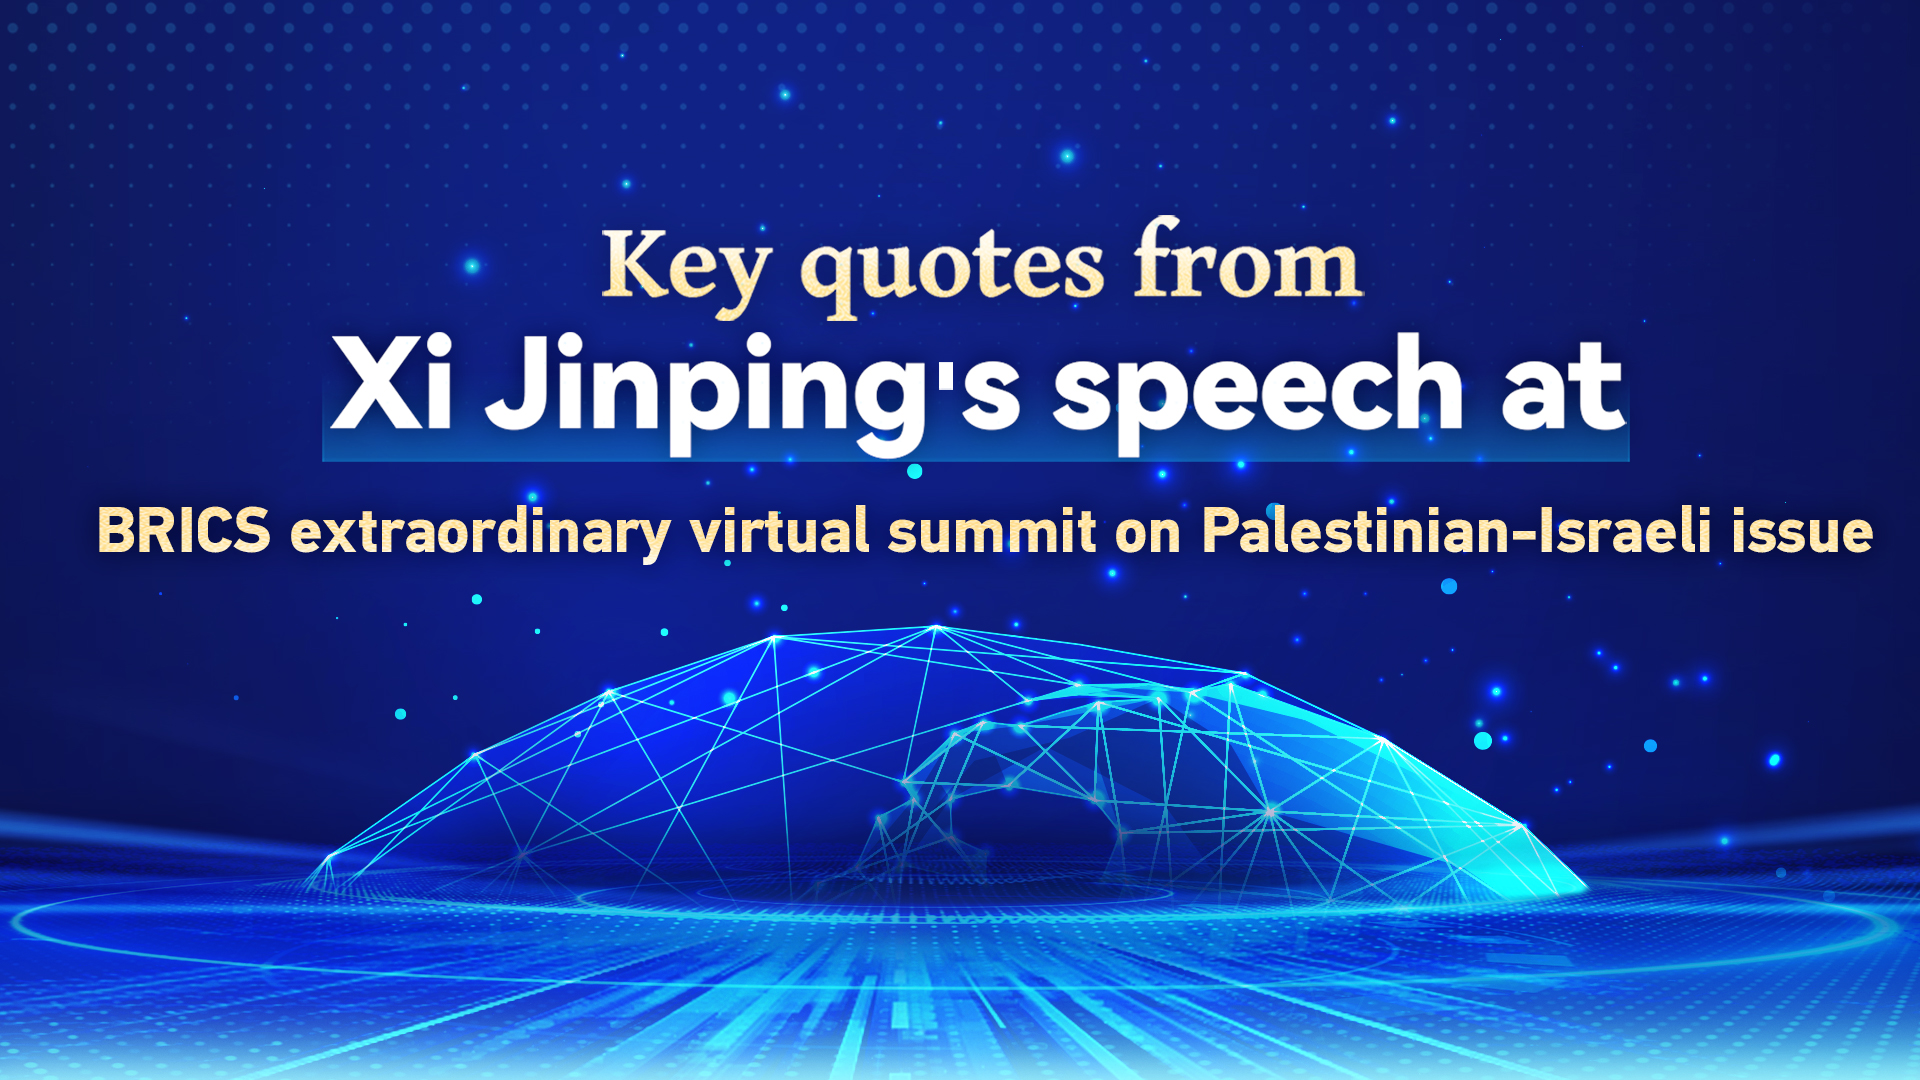 Xi Jinping's key quotes from BRICS summit on Palestinian-Israeli issue